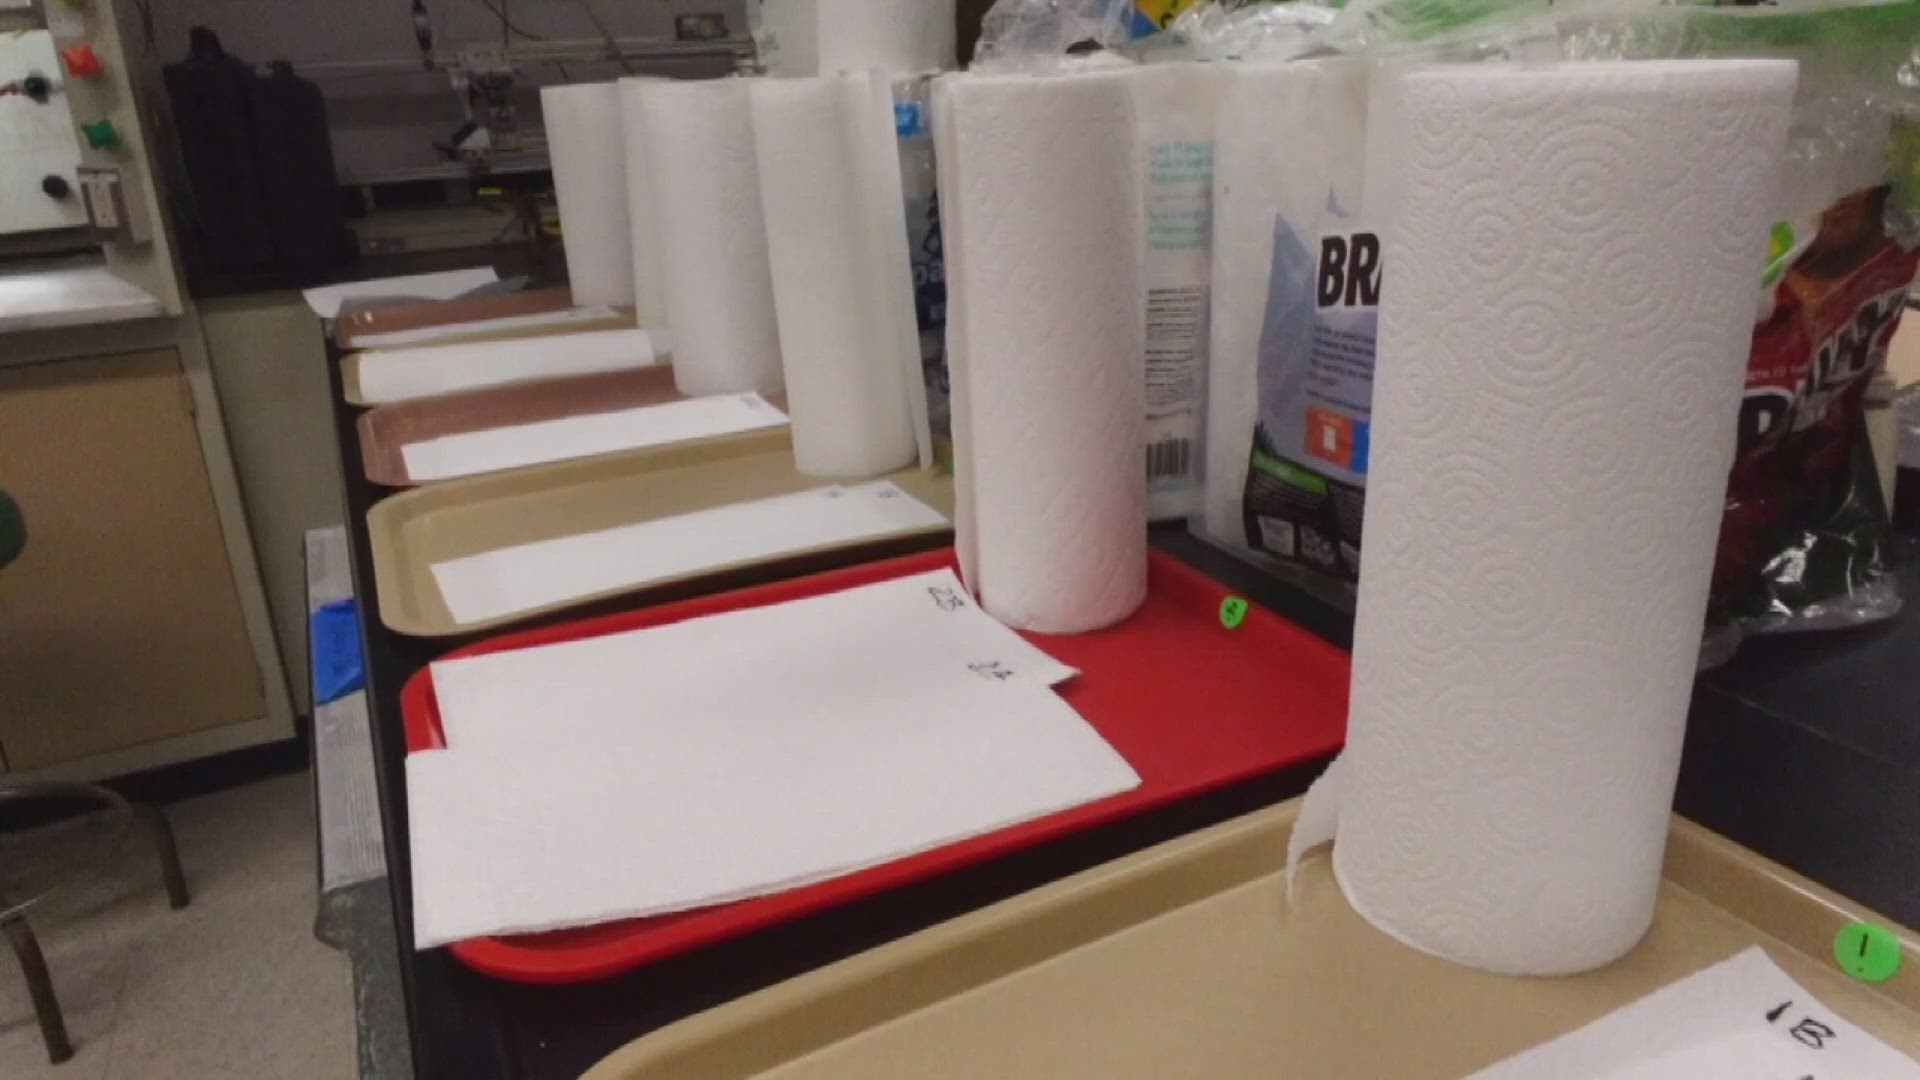 Consumer Reports tested paper towel brands to find out which were the most durable. They also looked at overall cost.